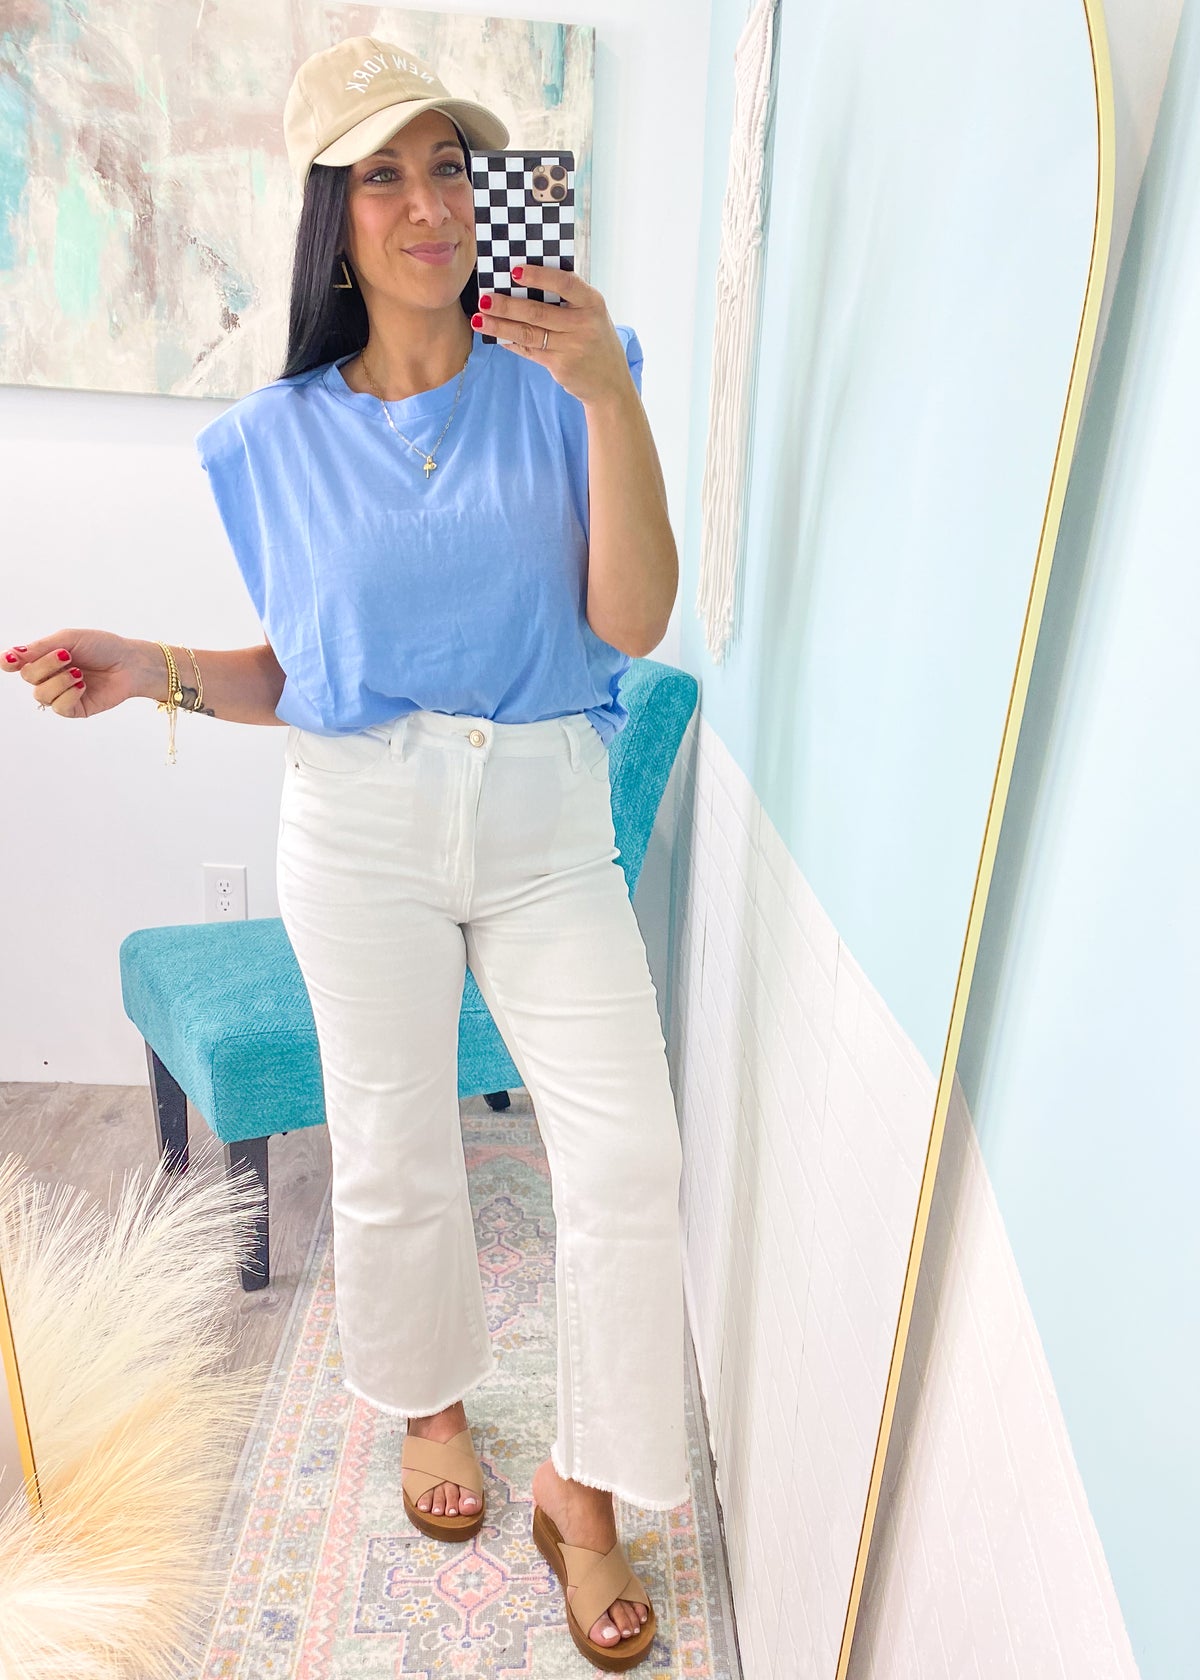 'Sky High' Baby Blue High Shoulder Tee-This padded high shoulder tee is the cutest addition to your tee shirt collection! A stand out chic look that you can wear on casual day dates or nights out. Wear tucked or untucked for different looks.&nbsp;<br>-Cali Moon Boutique, Plainville Connecticut